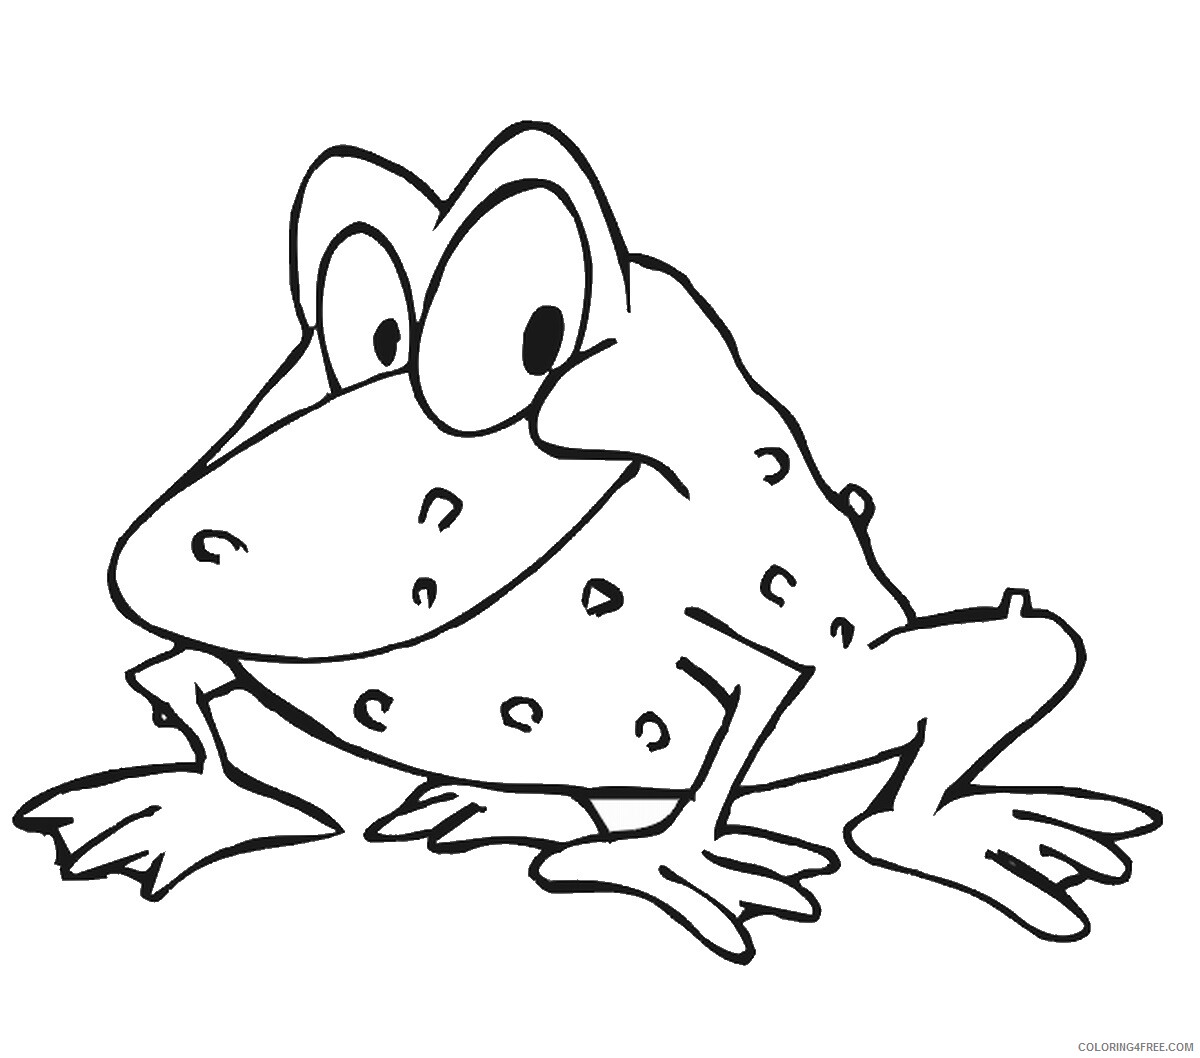 Frog Coloring Pages Animal Printable Sheets frog_cl_26 2021 2295 Coloring4free